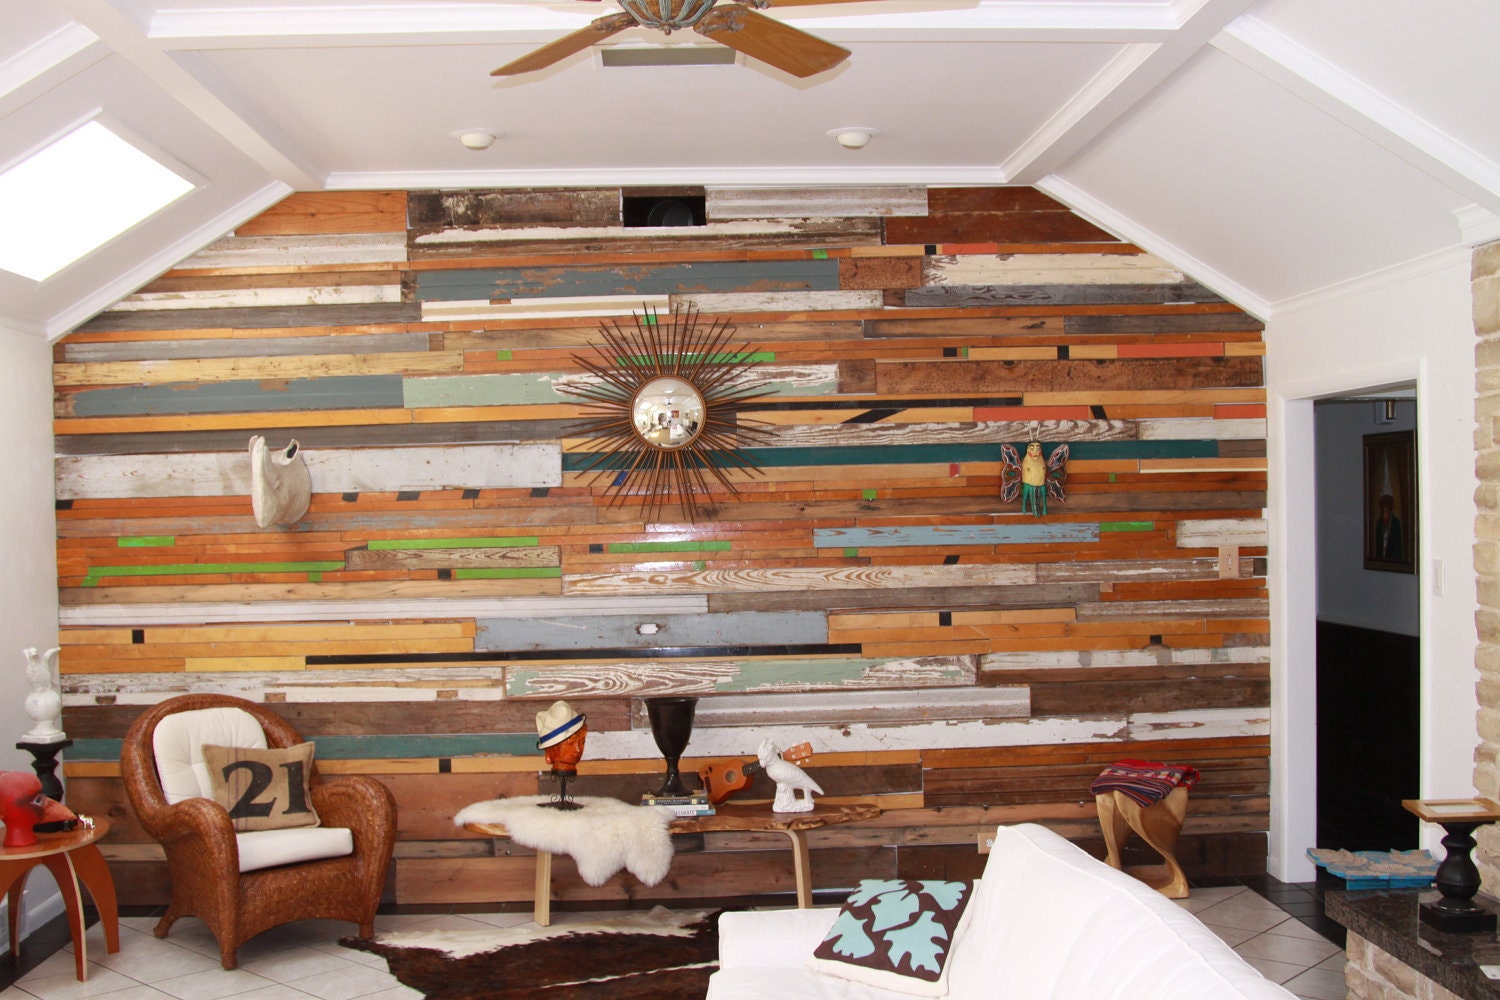 Wood Paneling With a History: Reclaimed Wood For Interiors